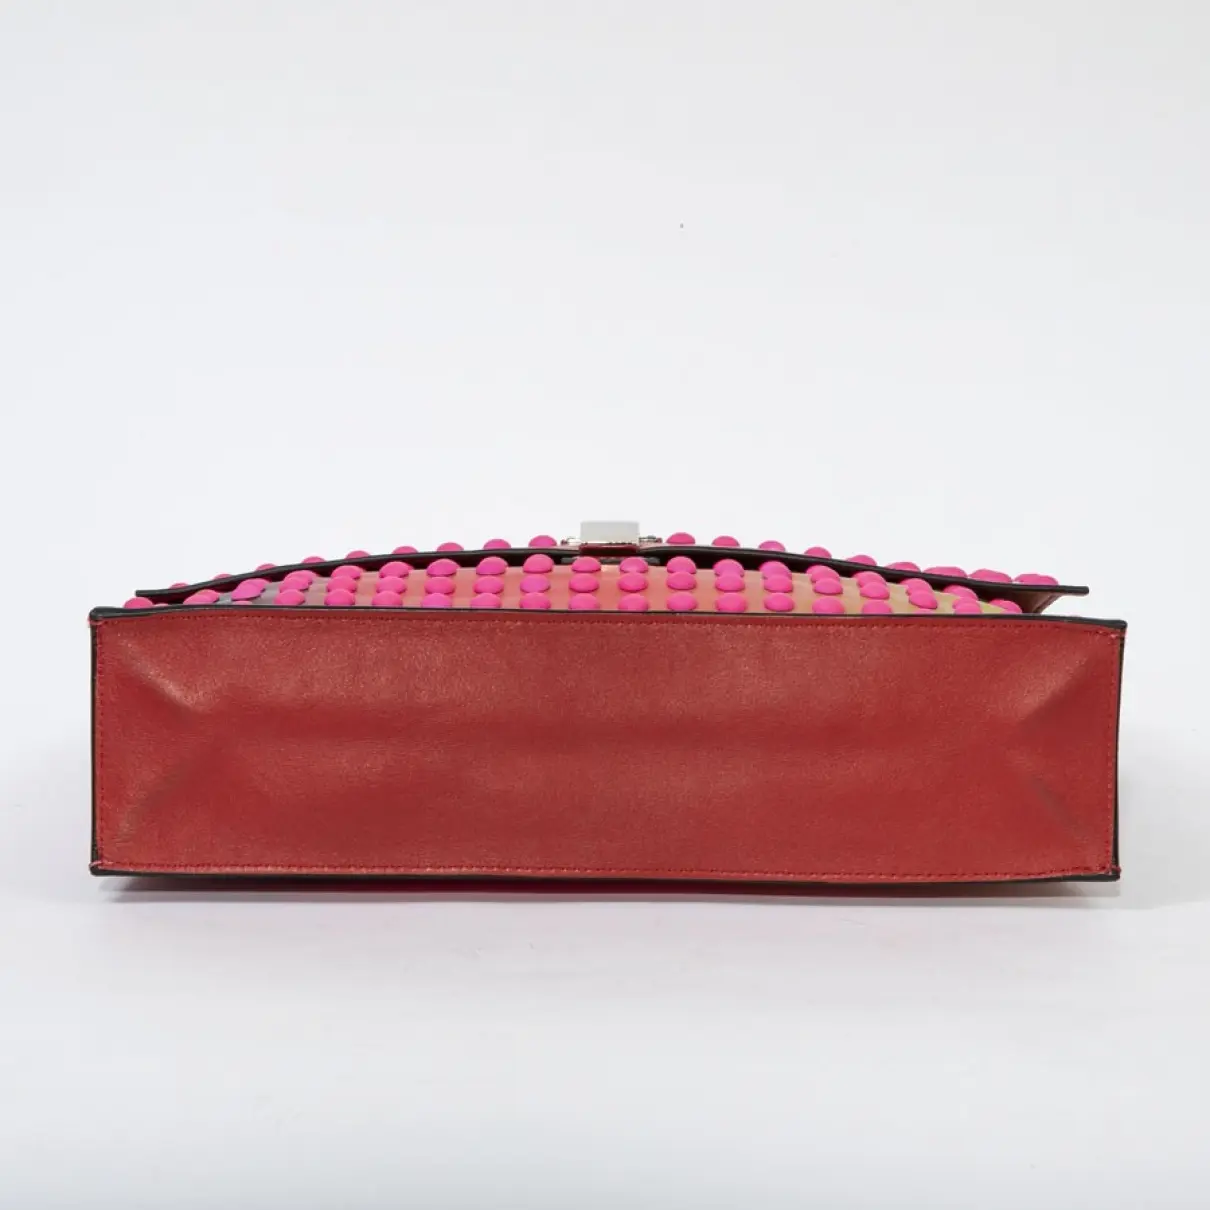 Proenza Schouler Lunch leather clutch bag for sale